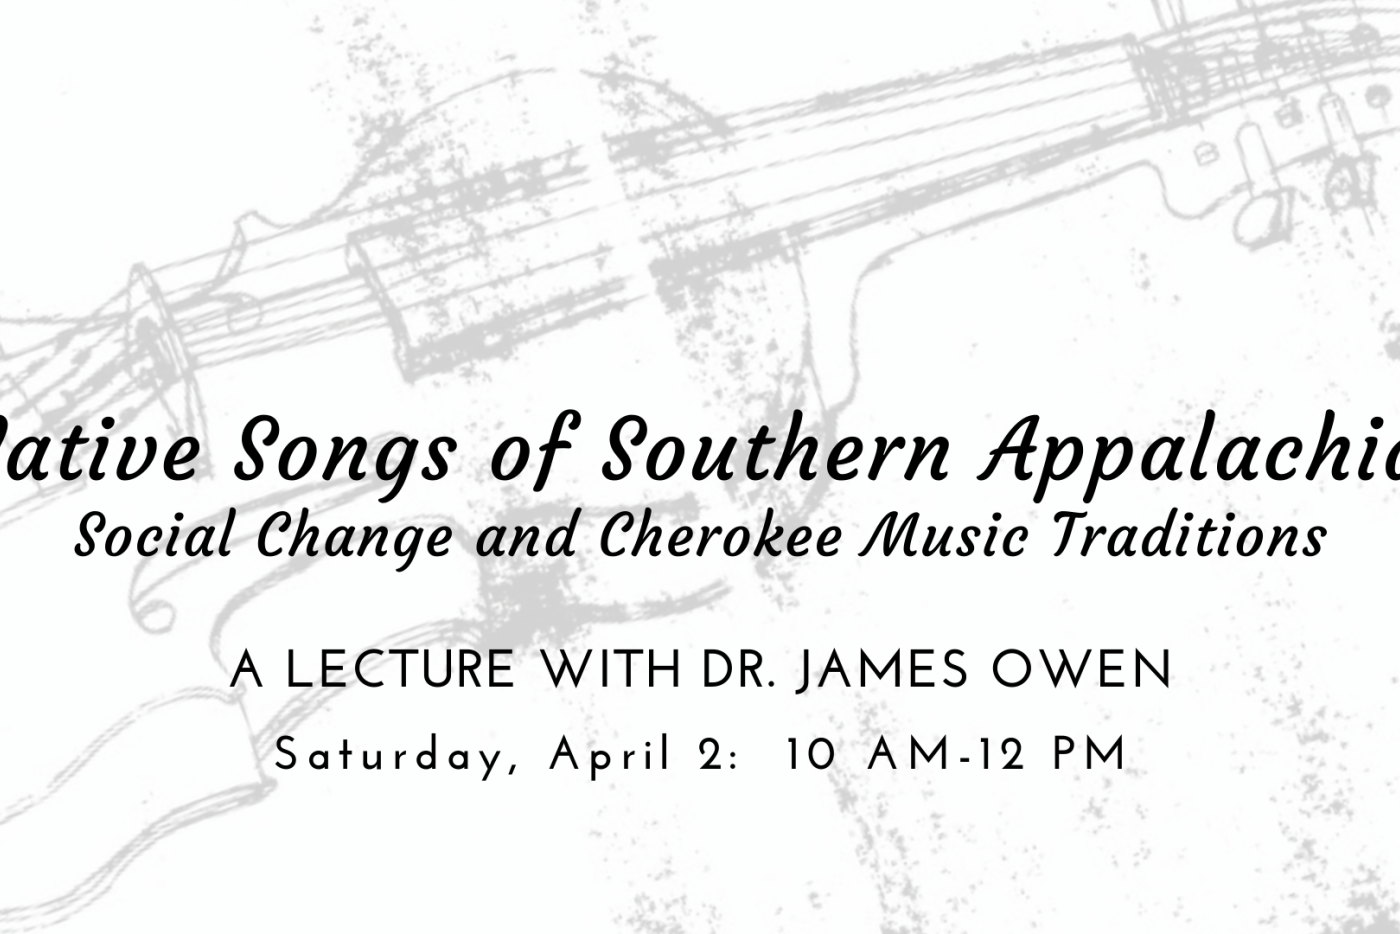 Sketch of a fiddle with the words "Native Songs of Southern Appalachia: Social Change and Cherokee Music Tradition/A Lecture with Dr. James Owen/Saturday, April 2: 10 AM-12 PM" superimposed over image